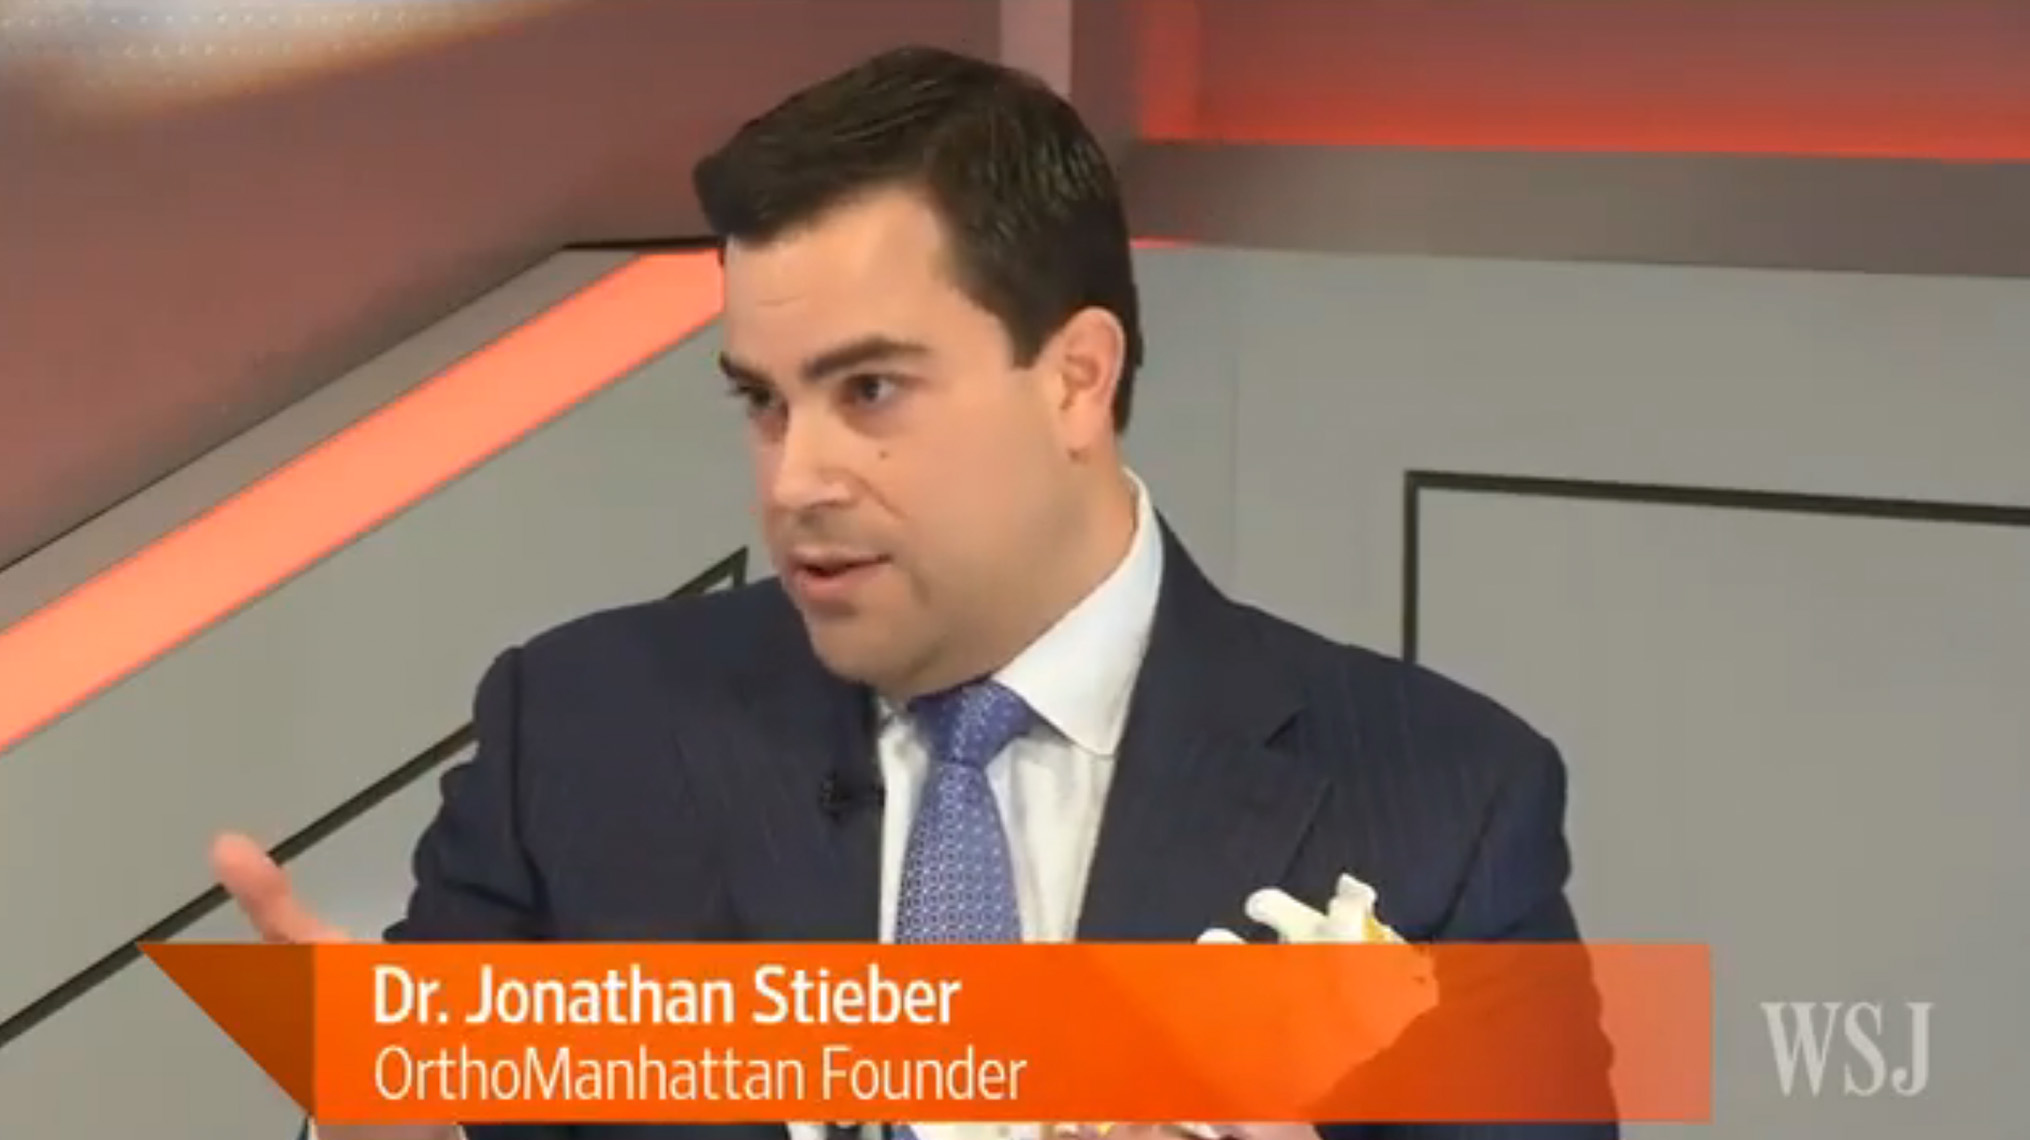 Dr. Jonathan Stieber featured on the Wall Street Journal Online's Lunch Break with Tanya Riviero.